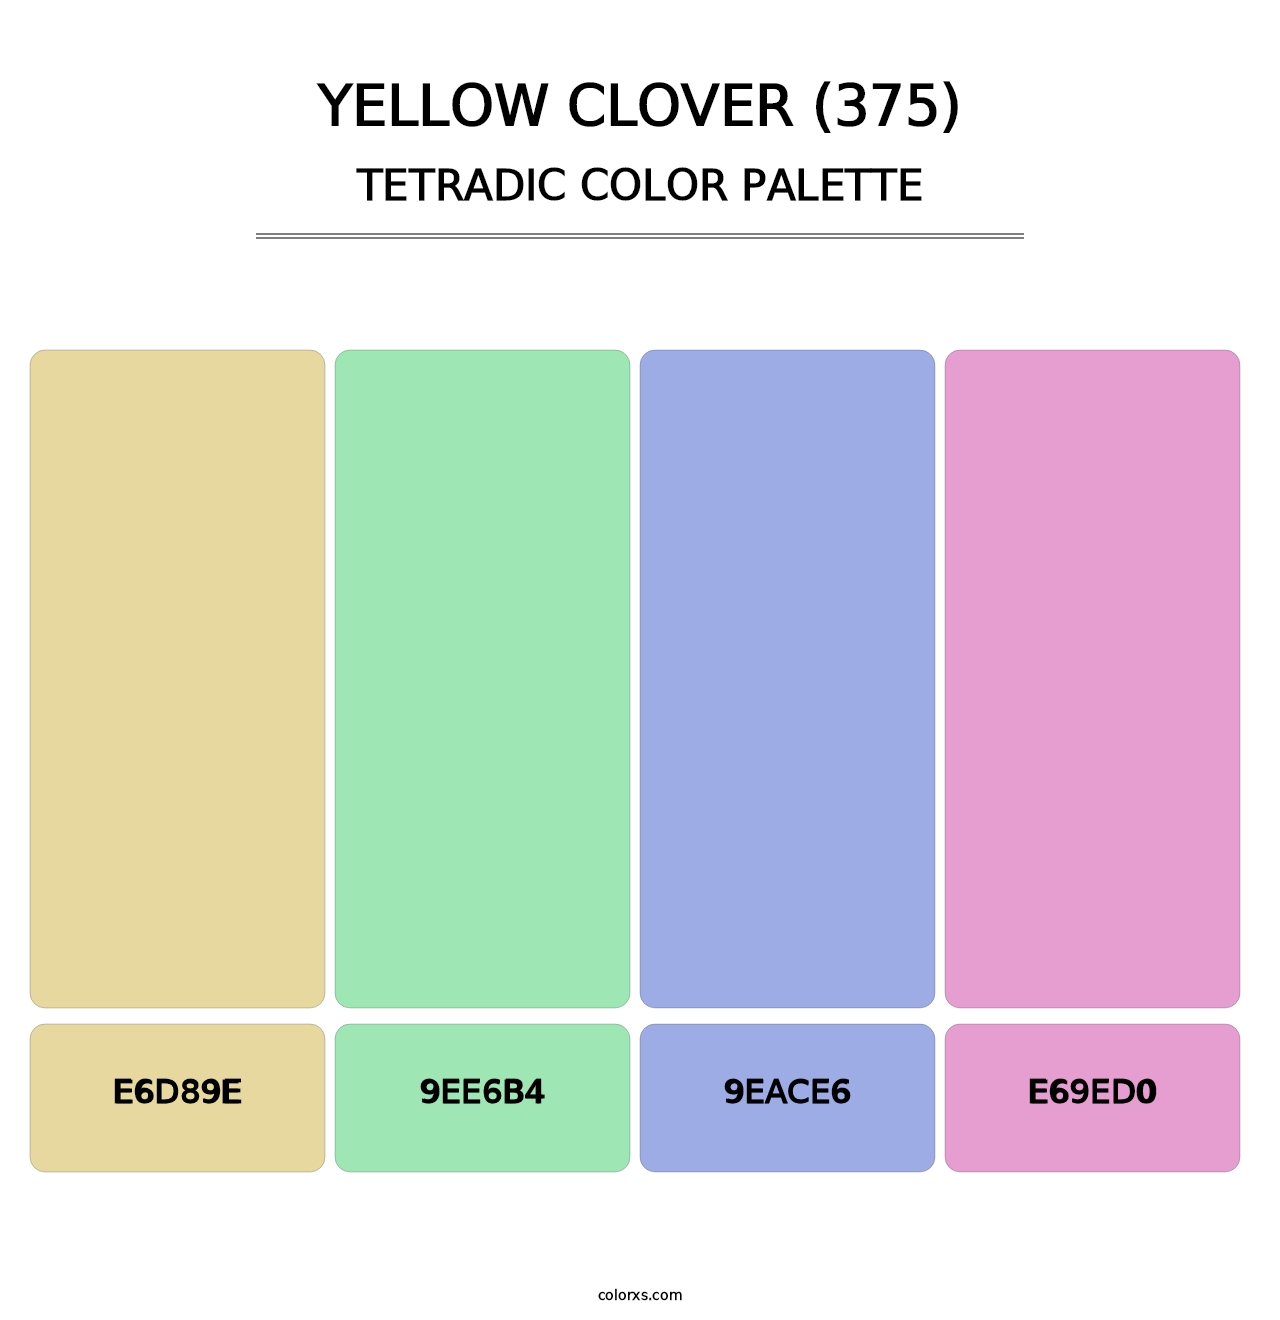 Yellow Clover (375) - Tetradic Color Palette